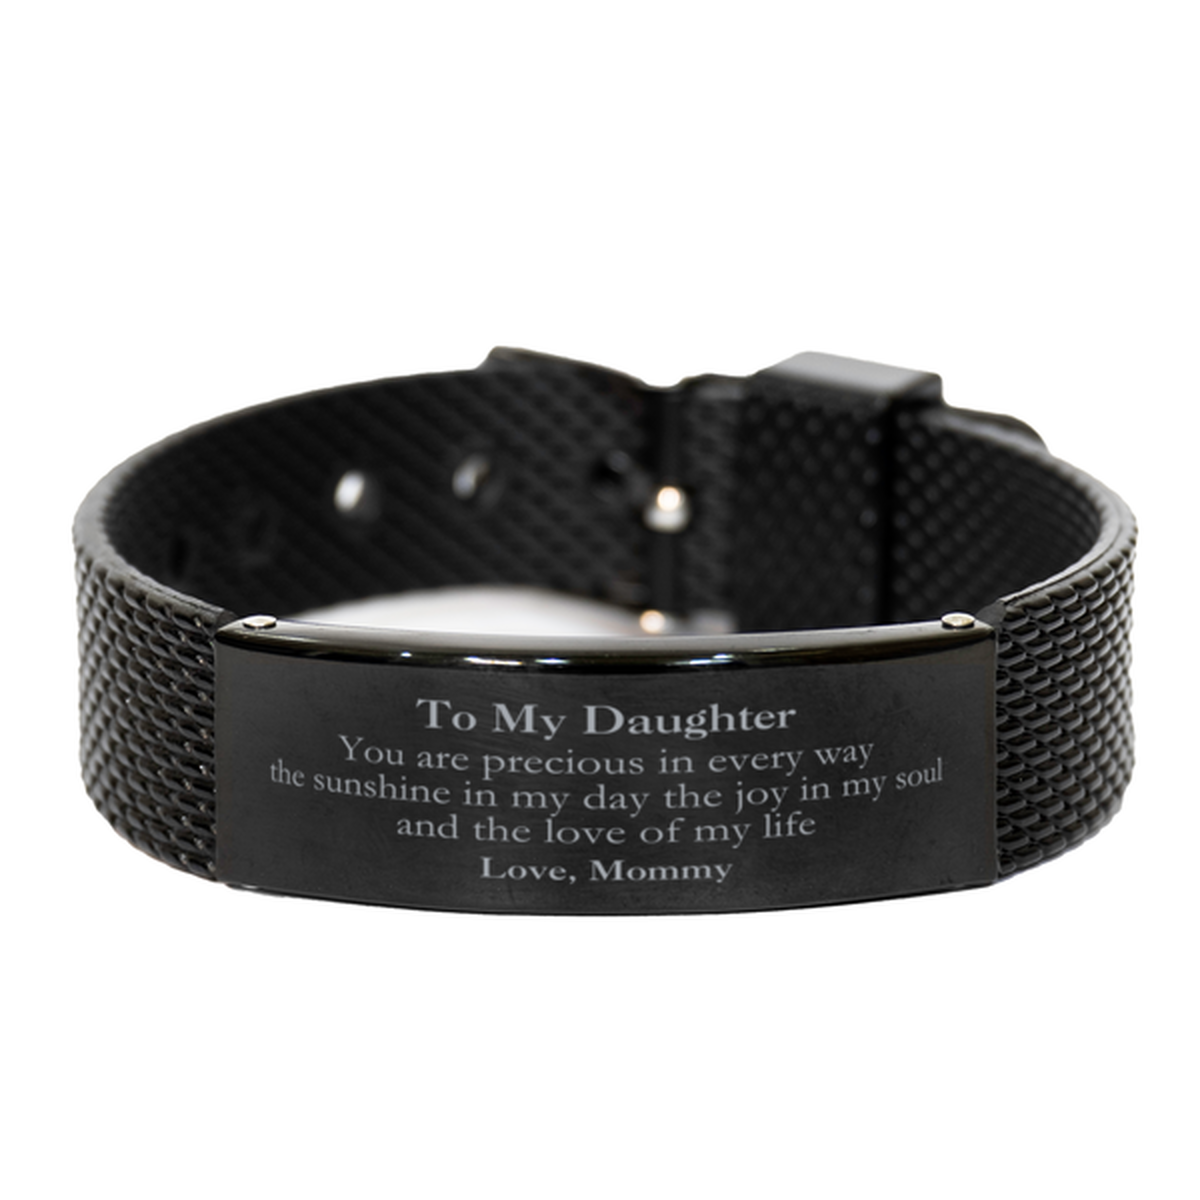 Graduation Gifts for Daughter Black Shark Mesh Bracelet Present from Mommy, Christmas Daughter Birthday Gifts Daughter You are precious in every way the sunshine in my day. Love, Mommy